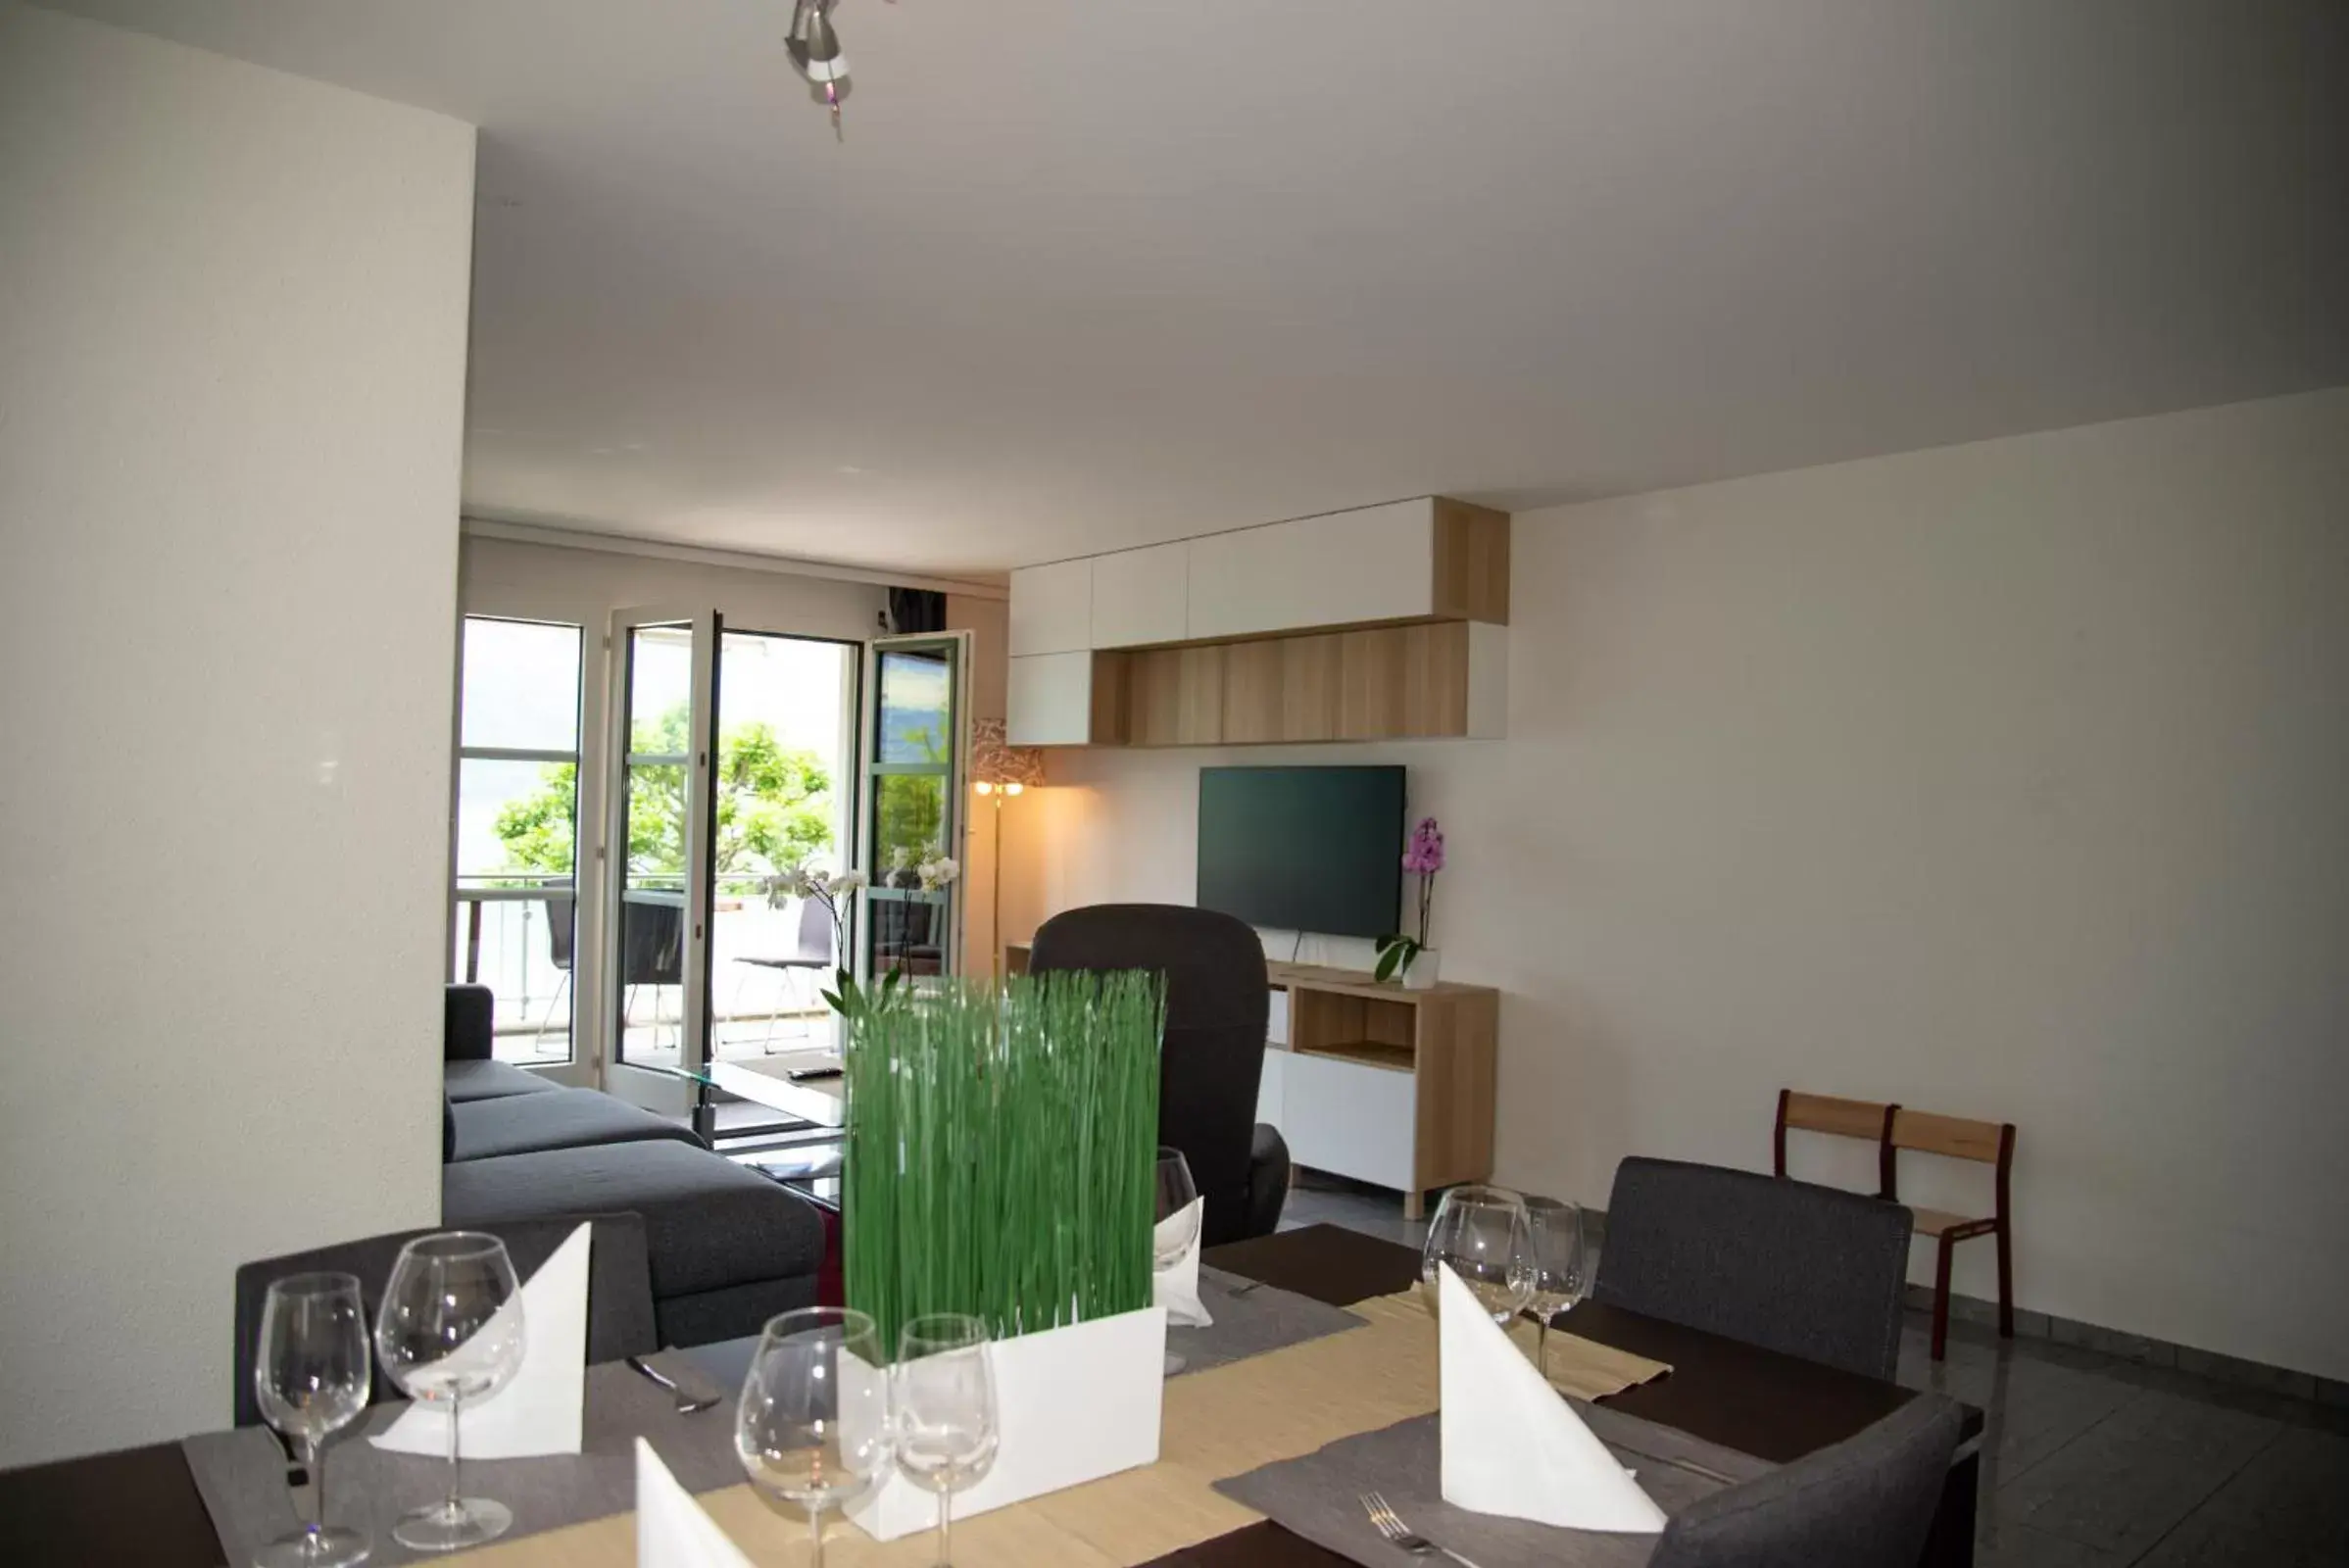 TV and multimedia, Dining Area in Seehotel Riviera at Lake Lucerne